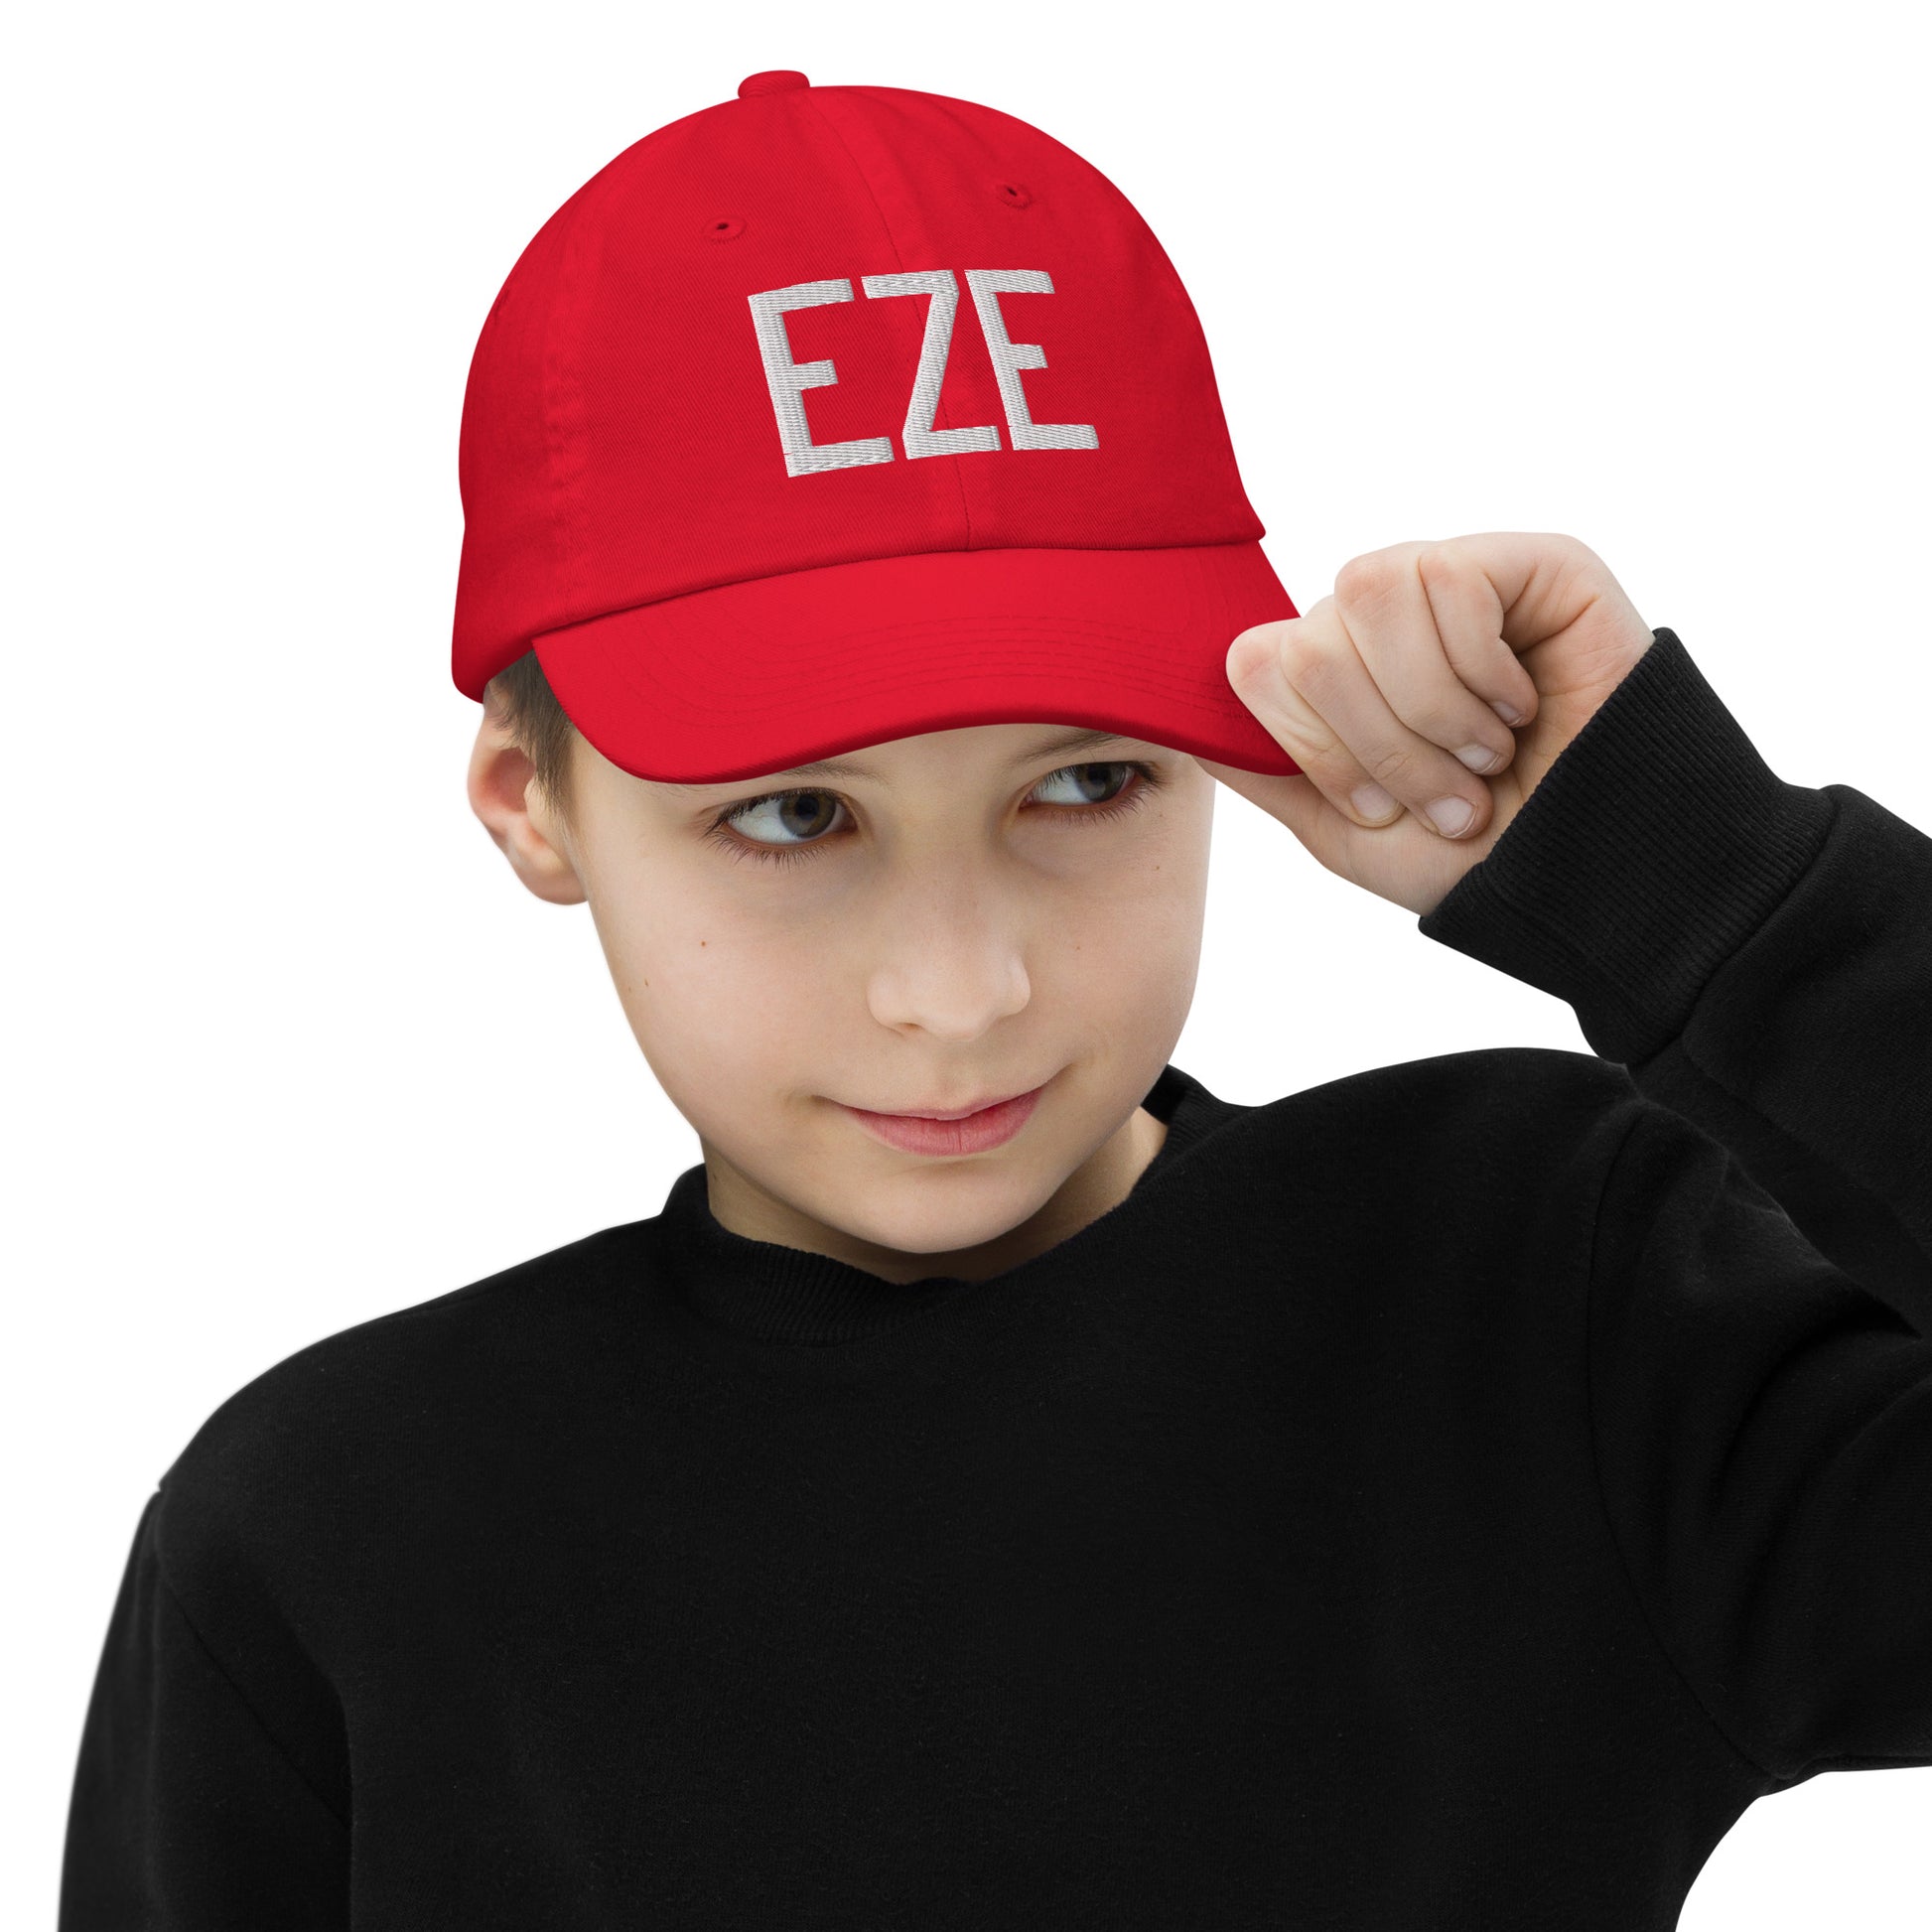 Airport Code Kid's Baseball Cap - White • EZE Buenos Aires • YHM Designs - Image 04